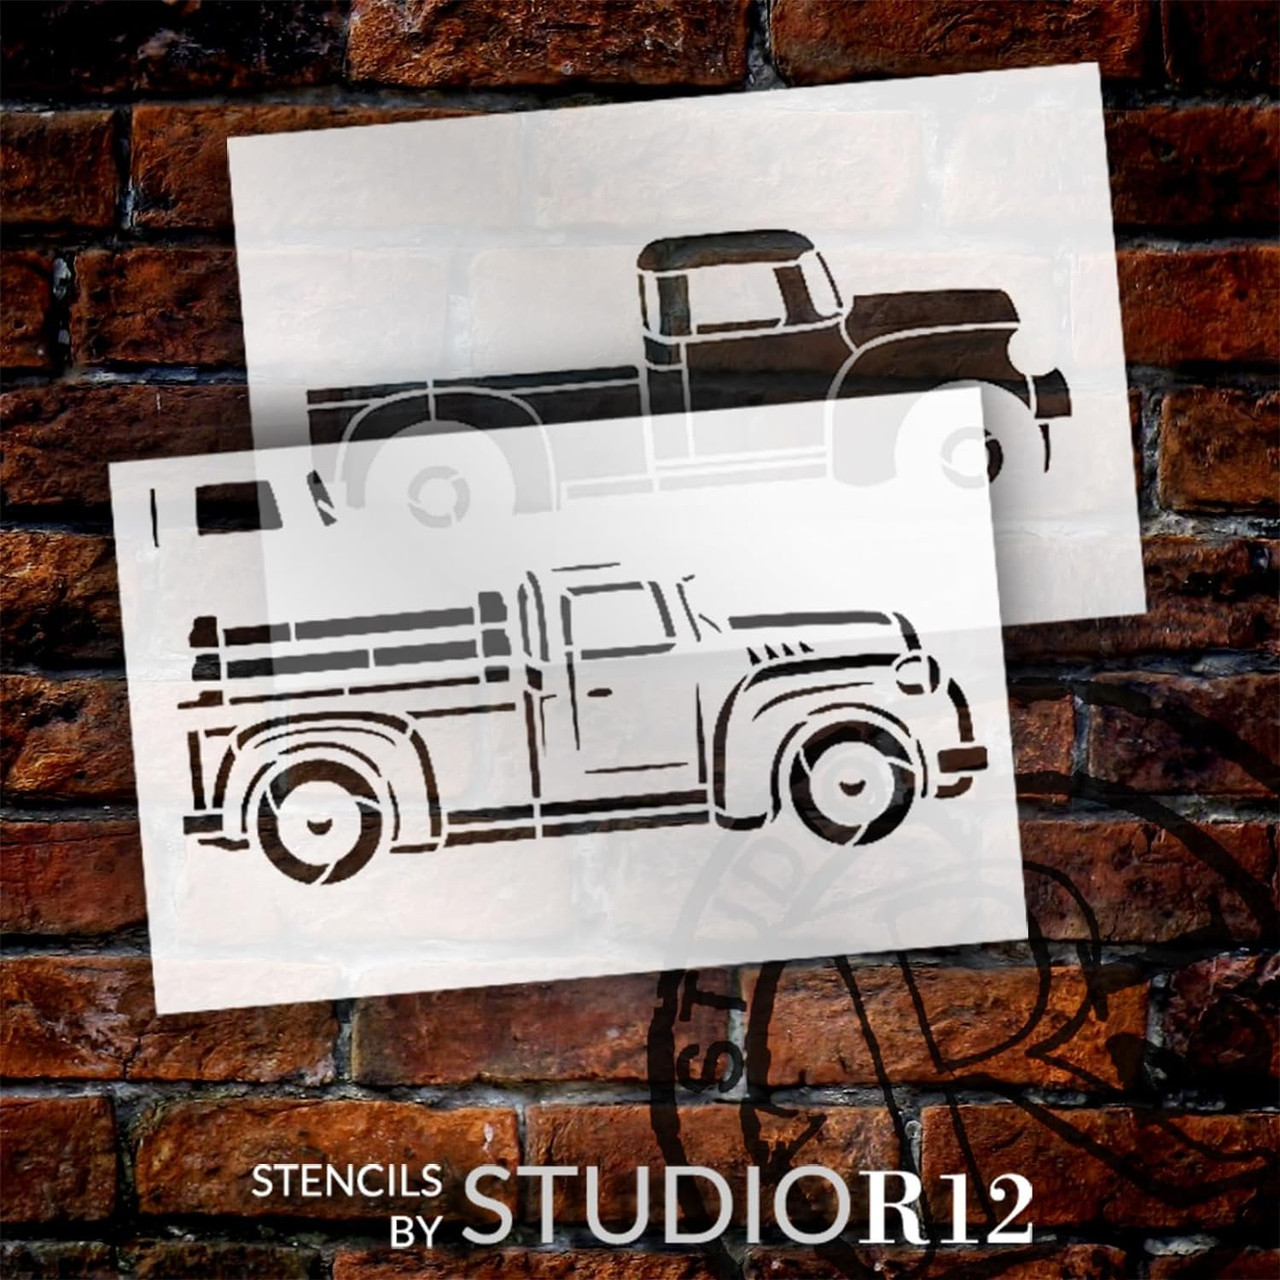 Old Vintage Truck Stencil by StudioR12 - USA Made - DIY Country Rustic Decor - 2 Part Reusable Template for Painting & Mixed Media - STCL7188